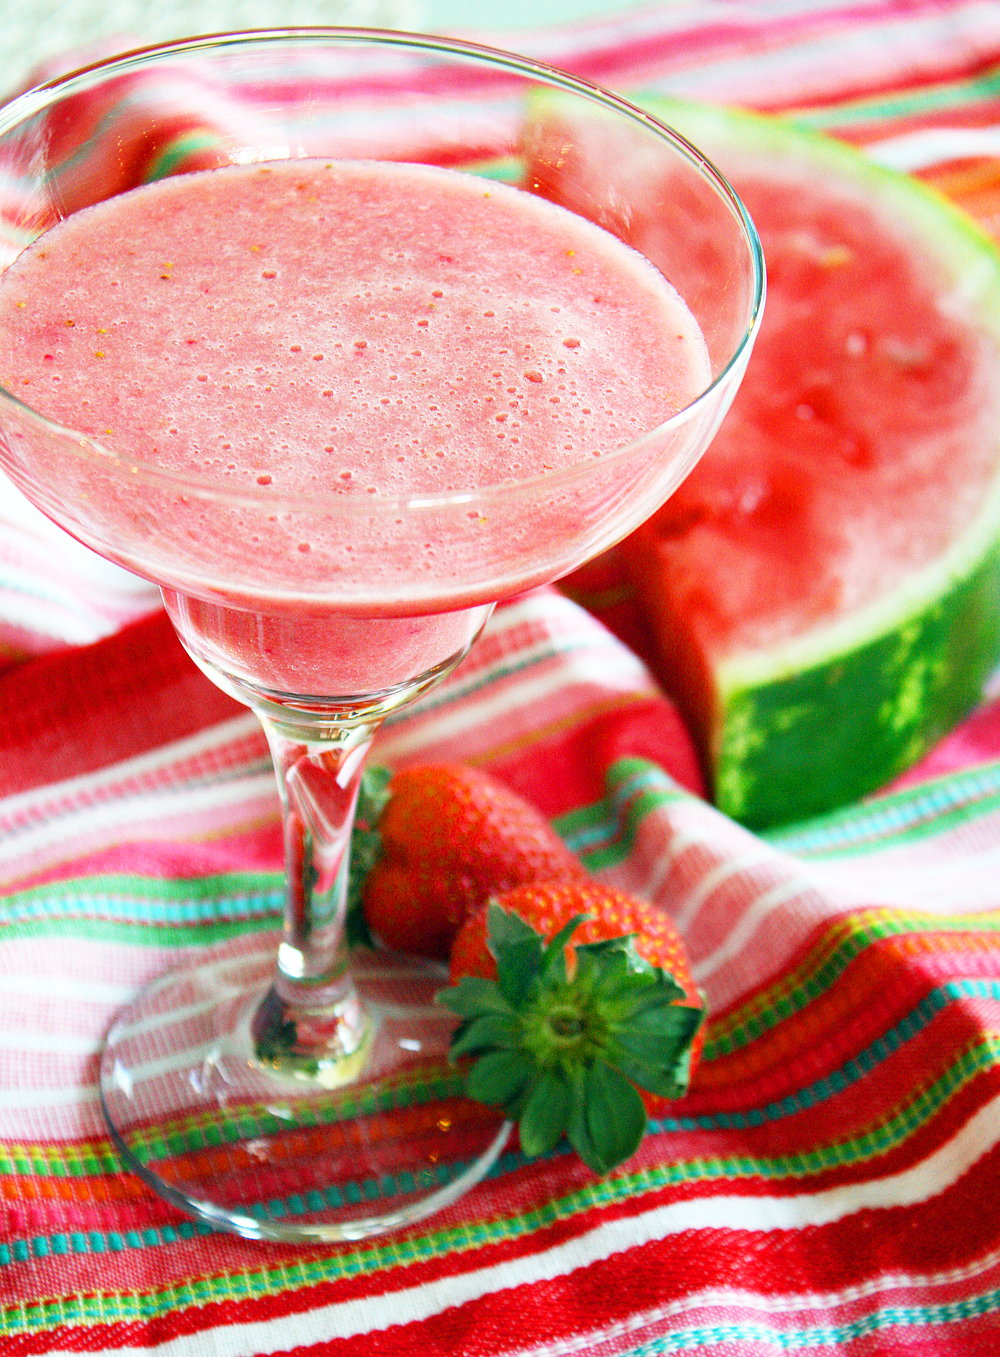 Watermelon, Strawberry and Banana Smoothie